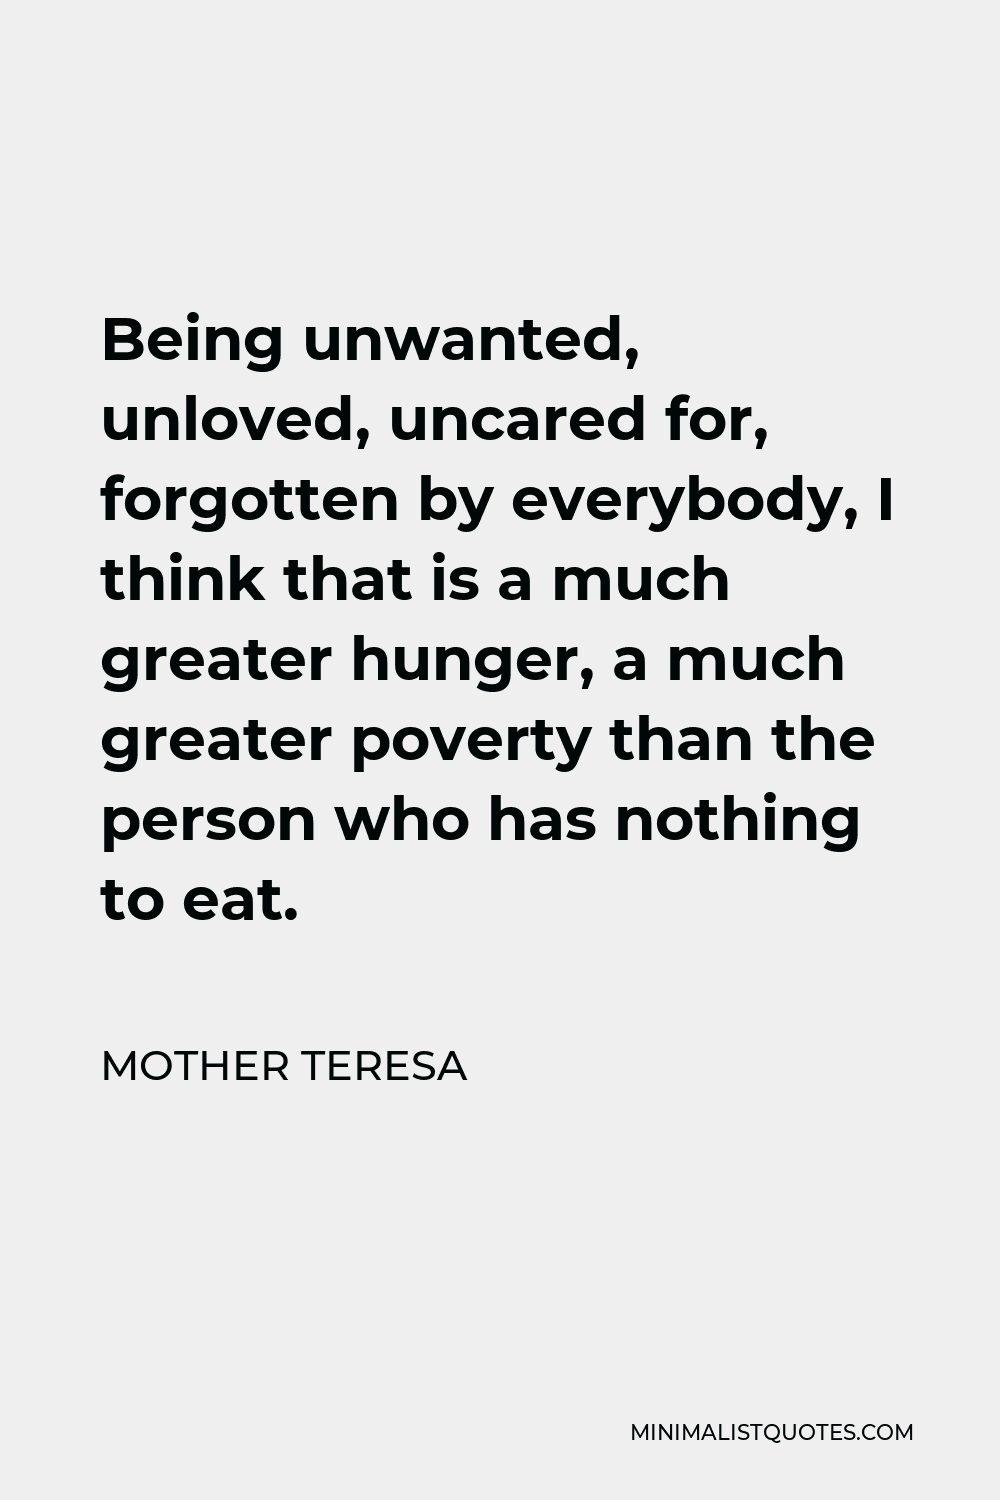 Mother Teresa Quote - Being unwanted, unloved, uncared for, forgotten by everybody, I think that is a much greater hunger, a much greater poverty than the person who has nothing to eat.